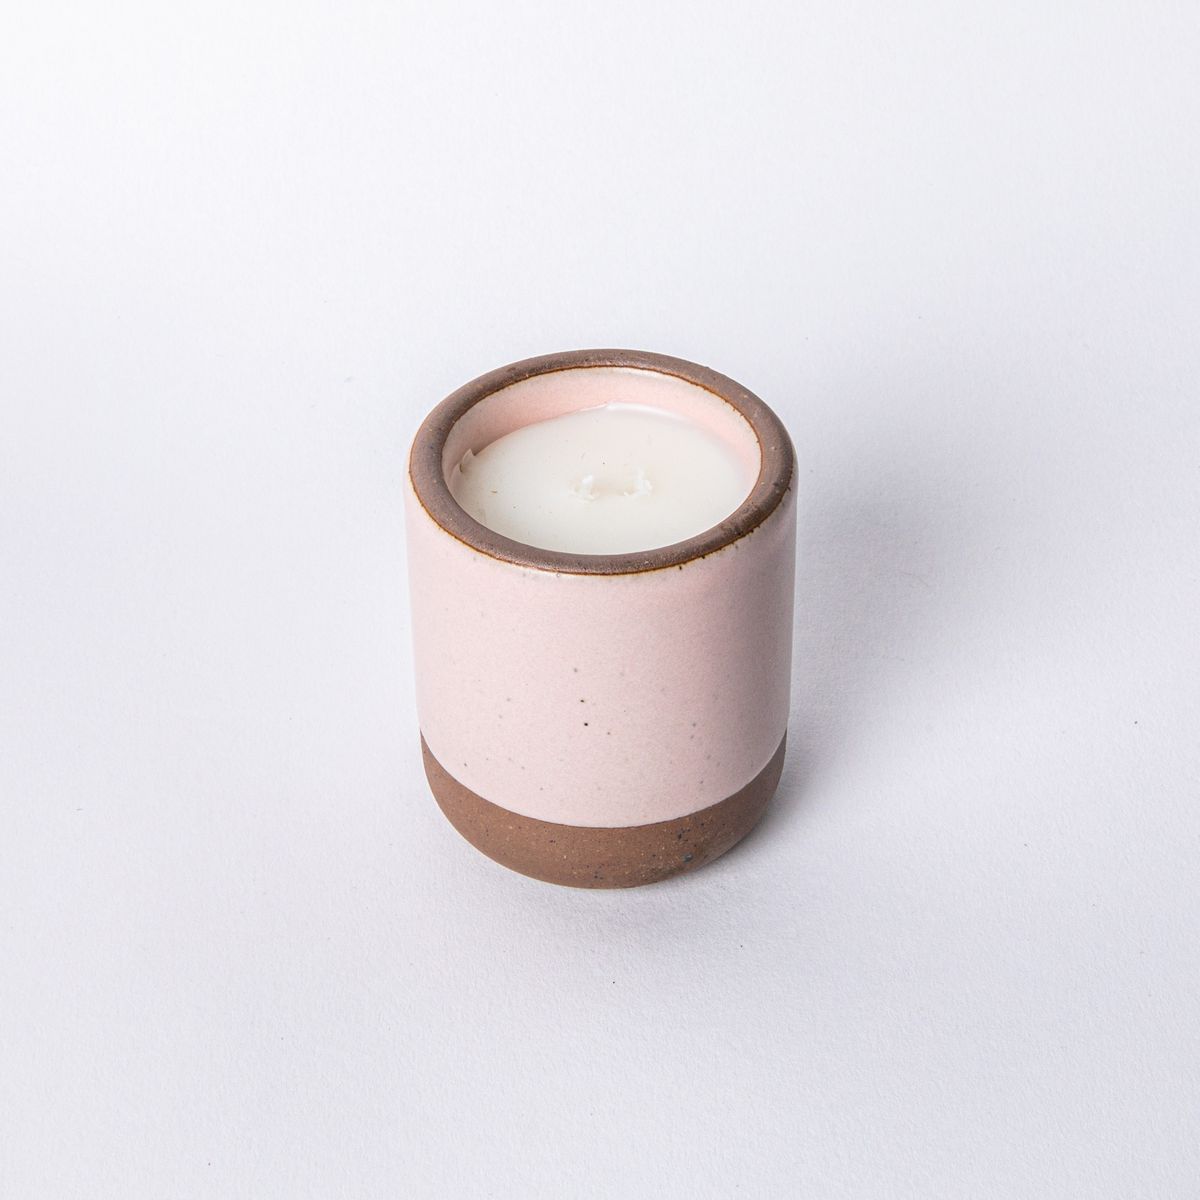 Small ceramic vessel in soft light pink color with candle inside